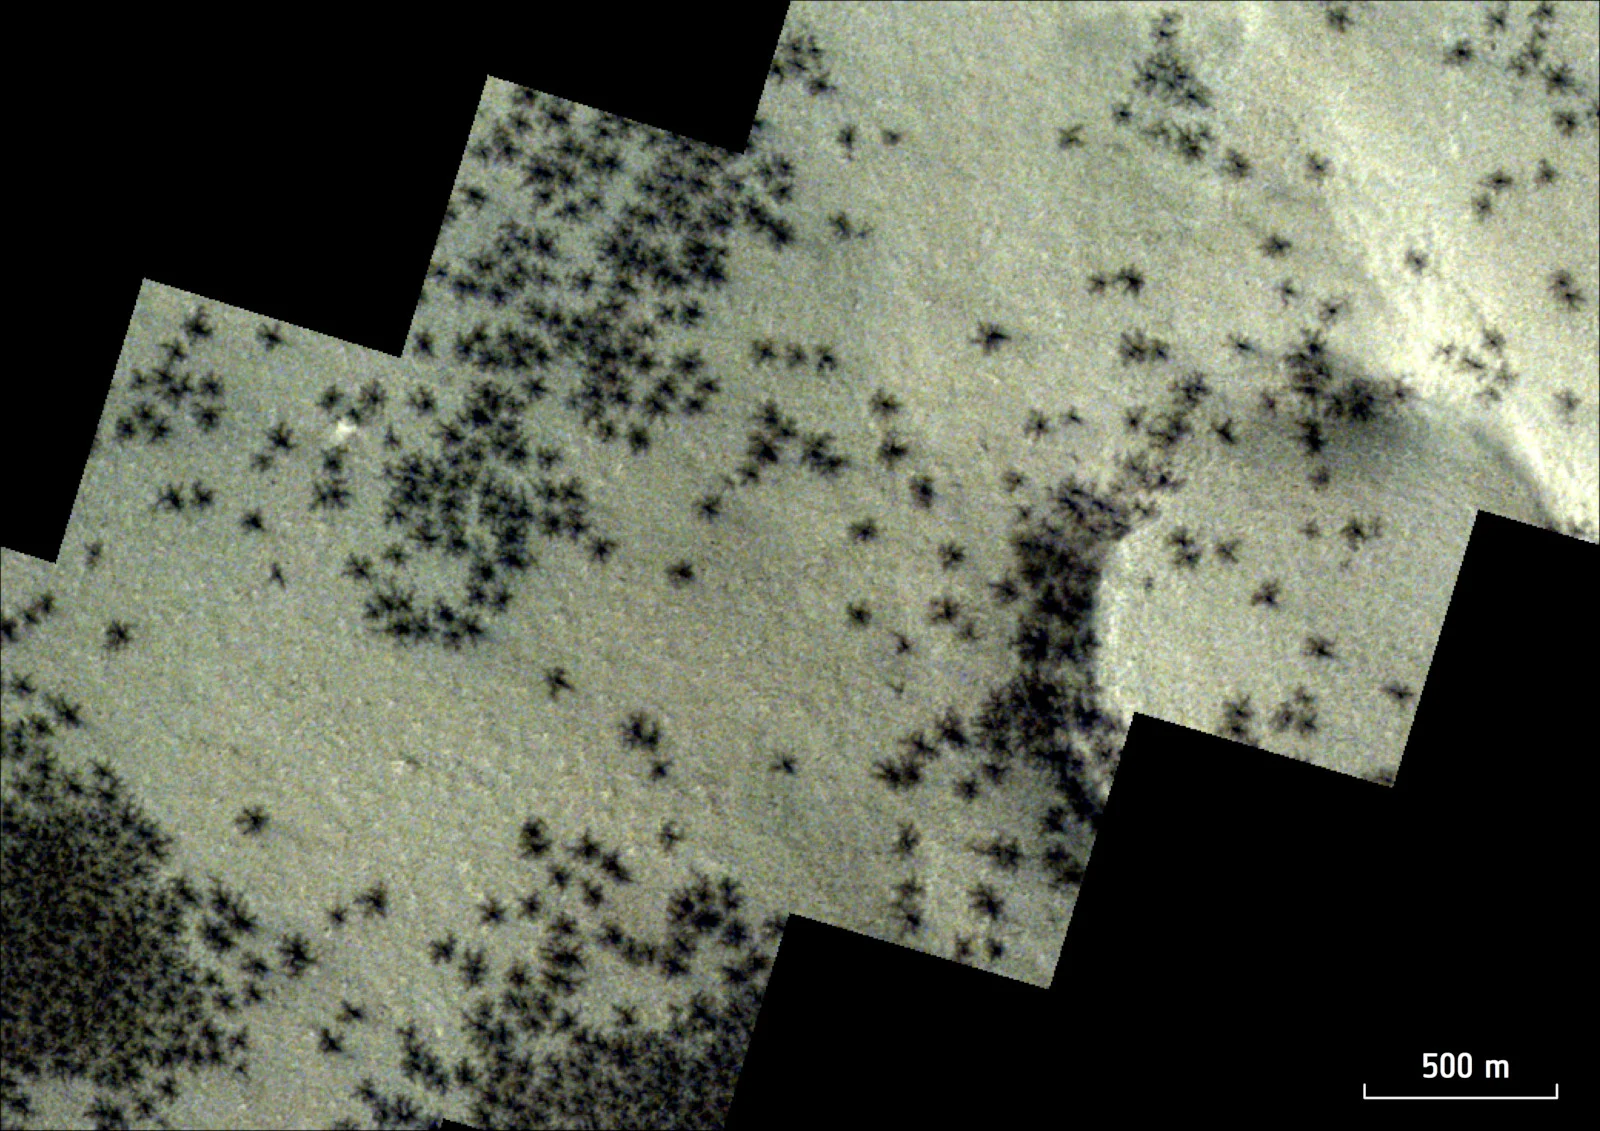 Spiders on Mars as seen by ESA's ExoMars Trace Gas Orbiter